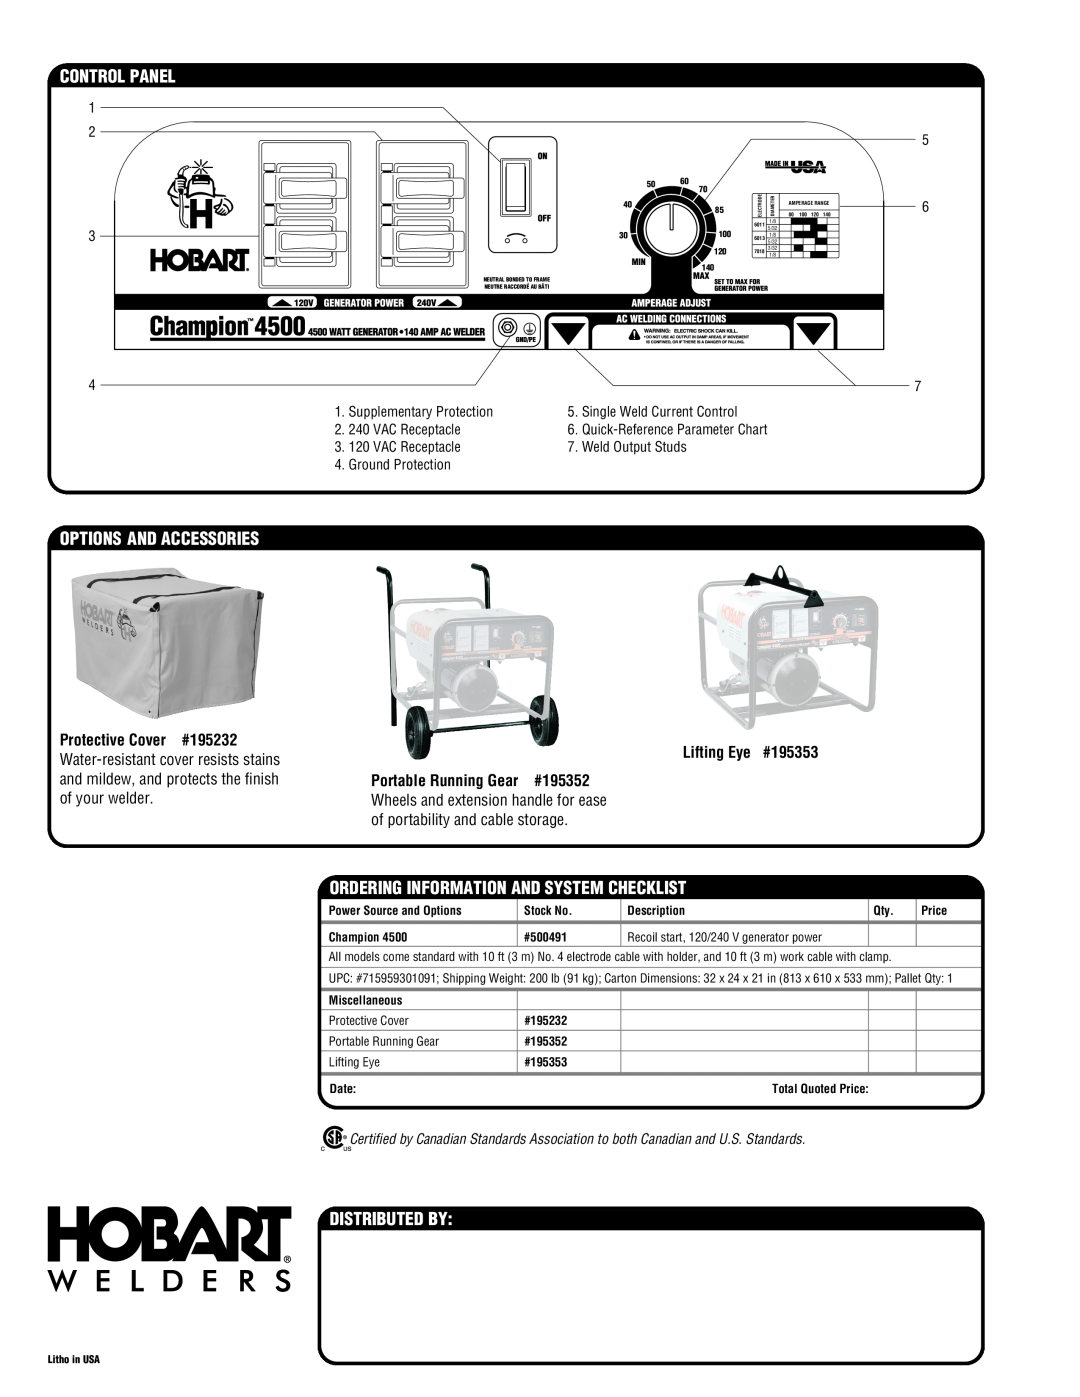 Hobart Welding Products Champion 4500 Control Panel, Options And Accessories, Ordering Information And System Checklist 